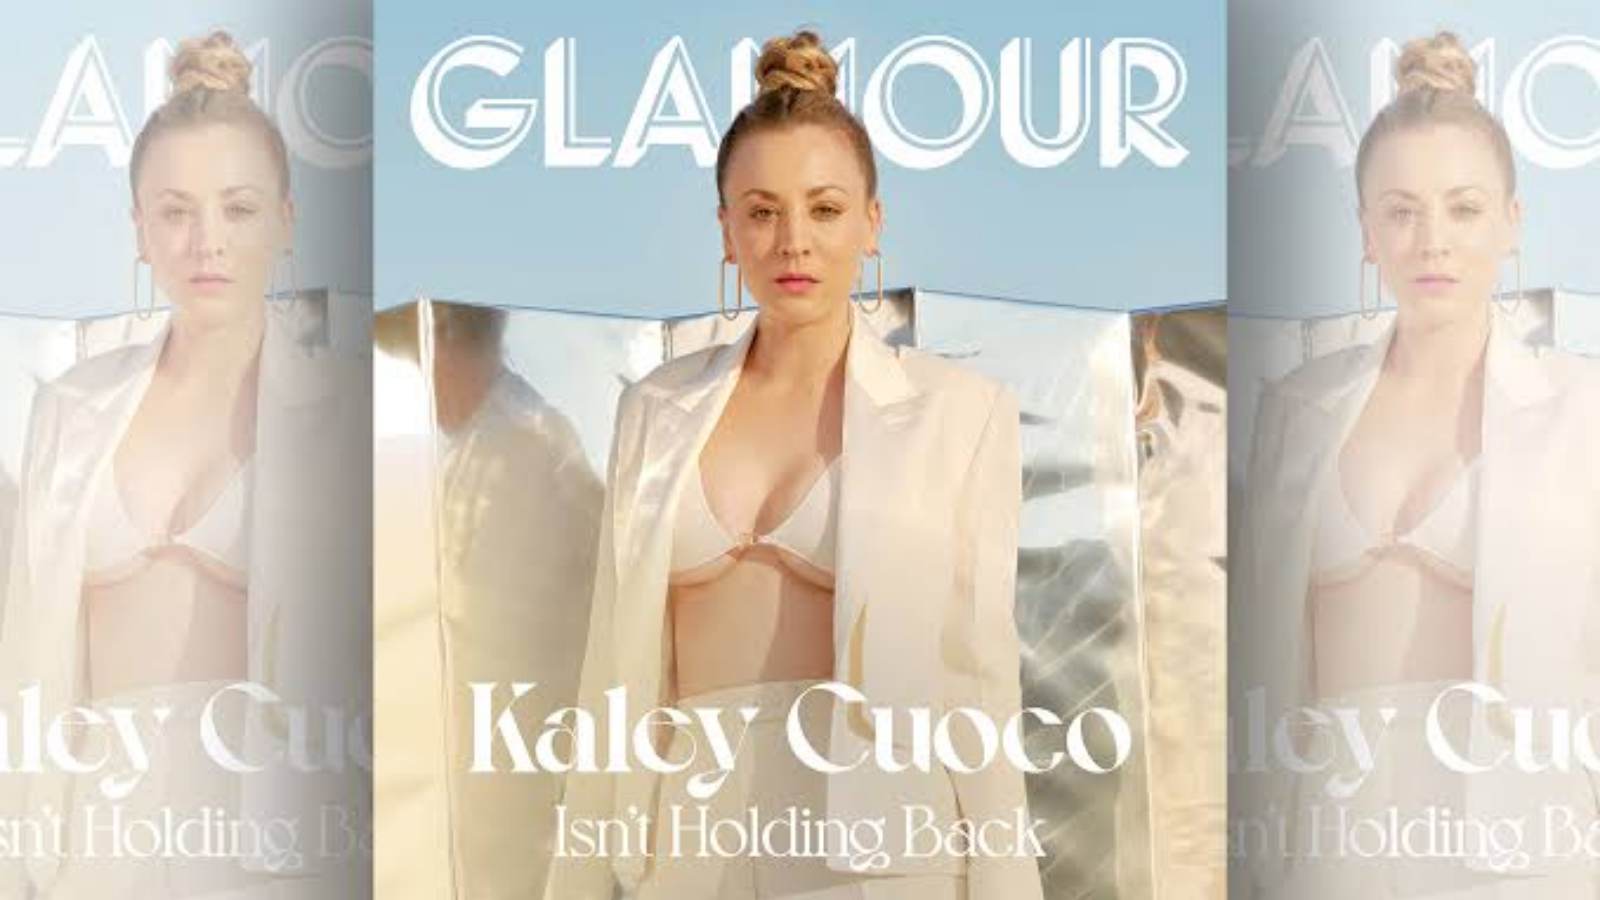 Kaley Cuoco on the cover of Glamour